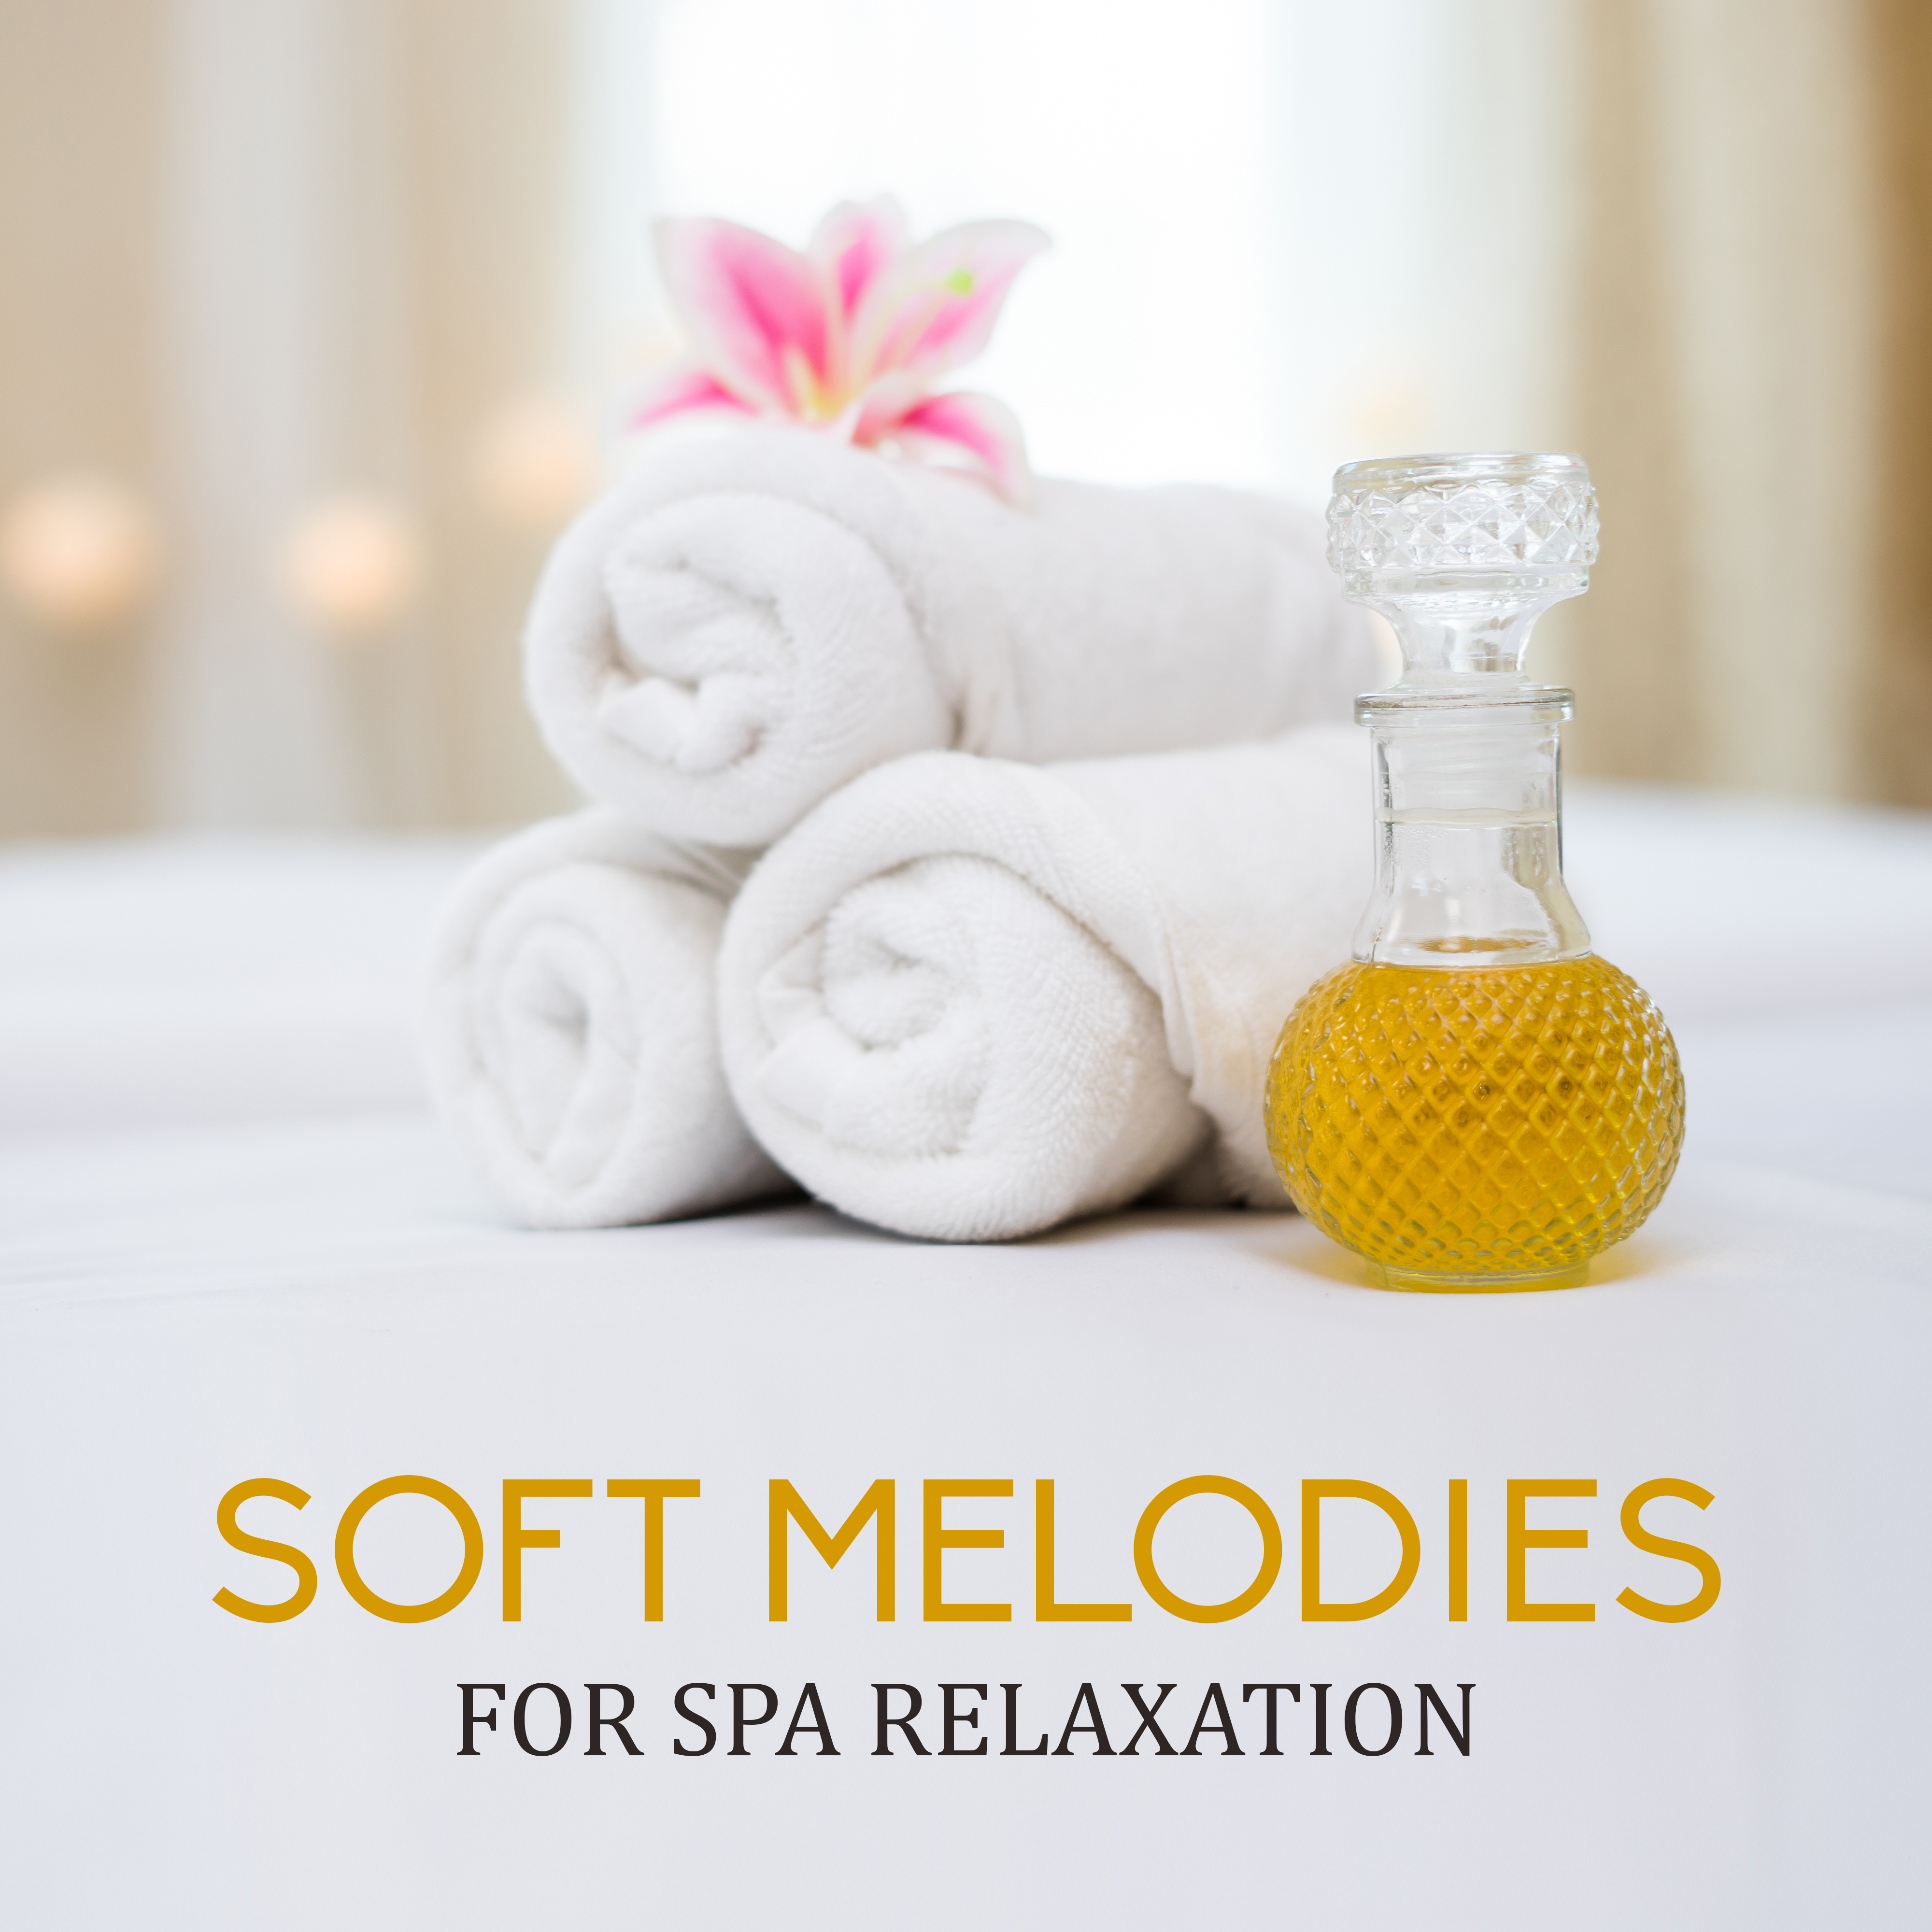 Soft Melodies for Spa Relaxation